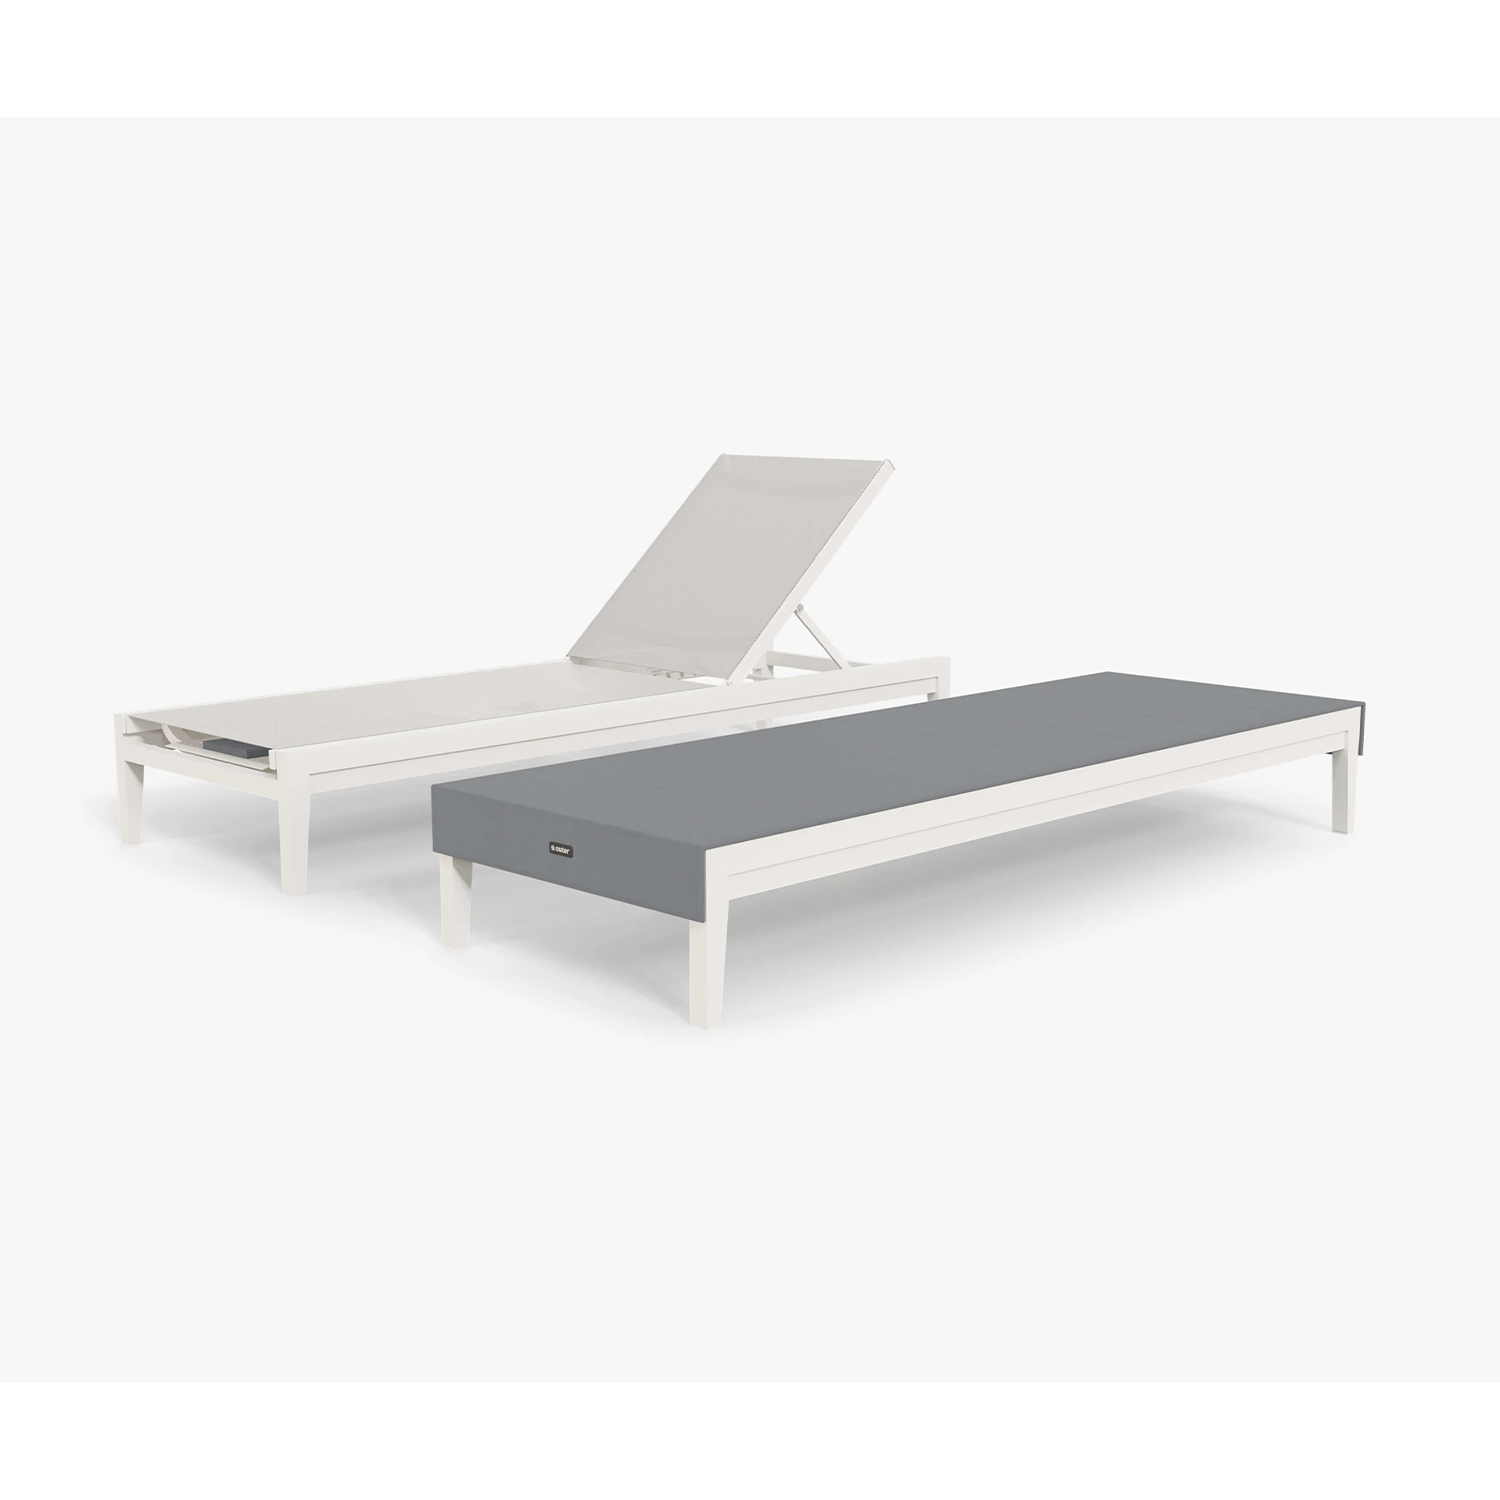 Outer aluminum pool lounger